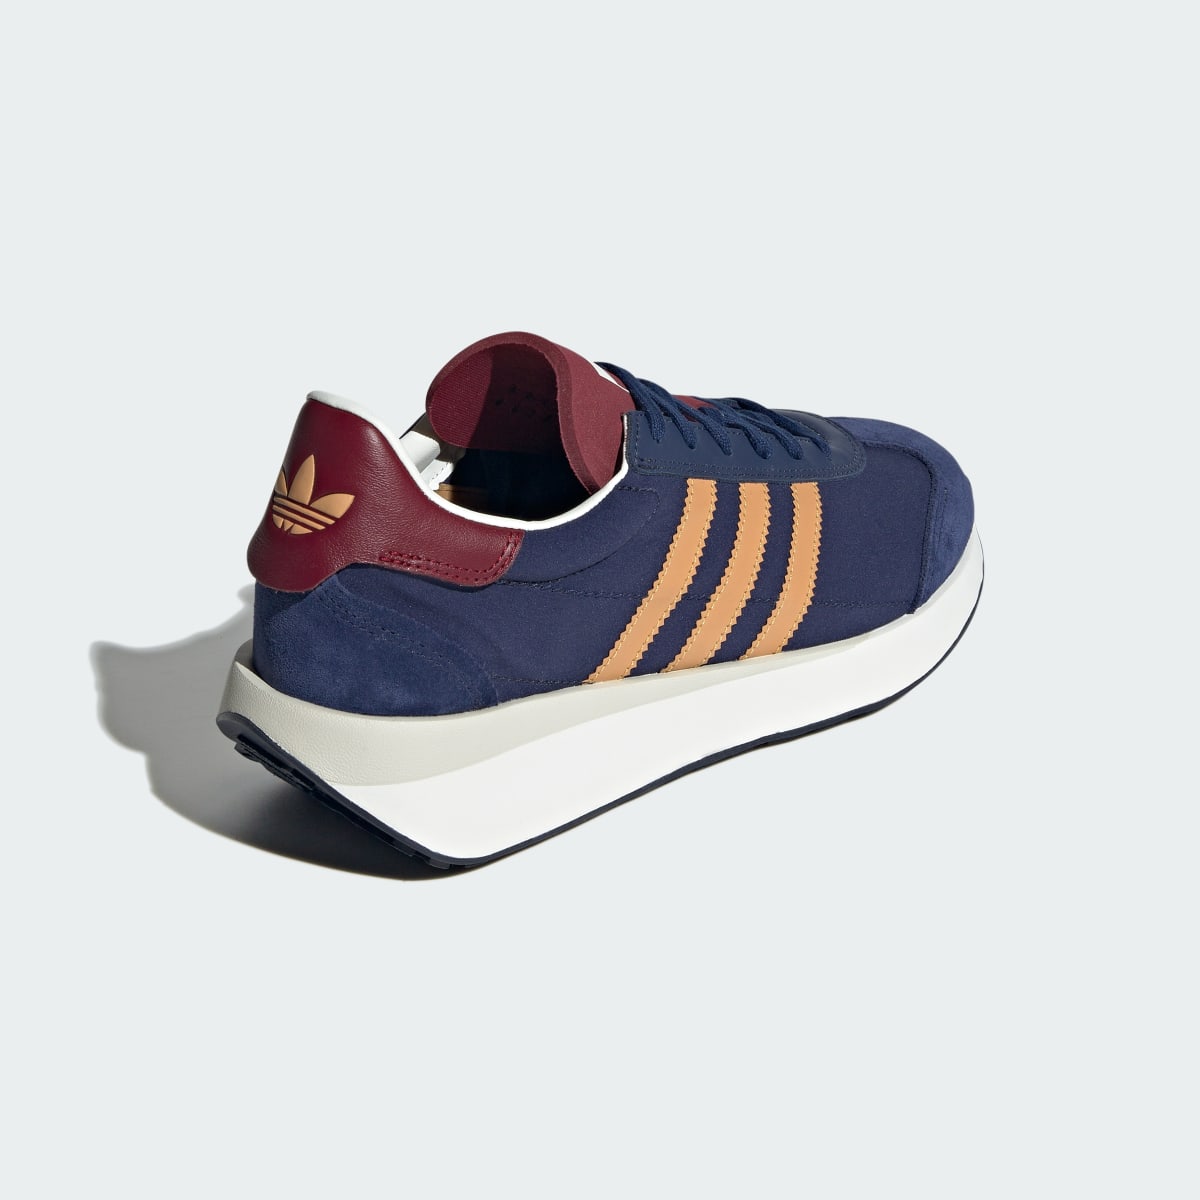 Adidas COUNTRY XLG. 9